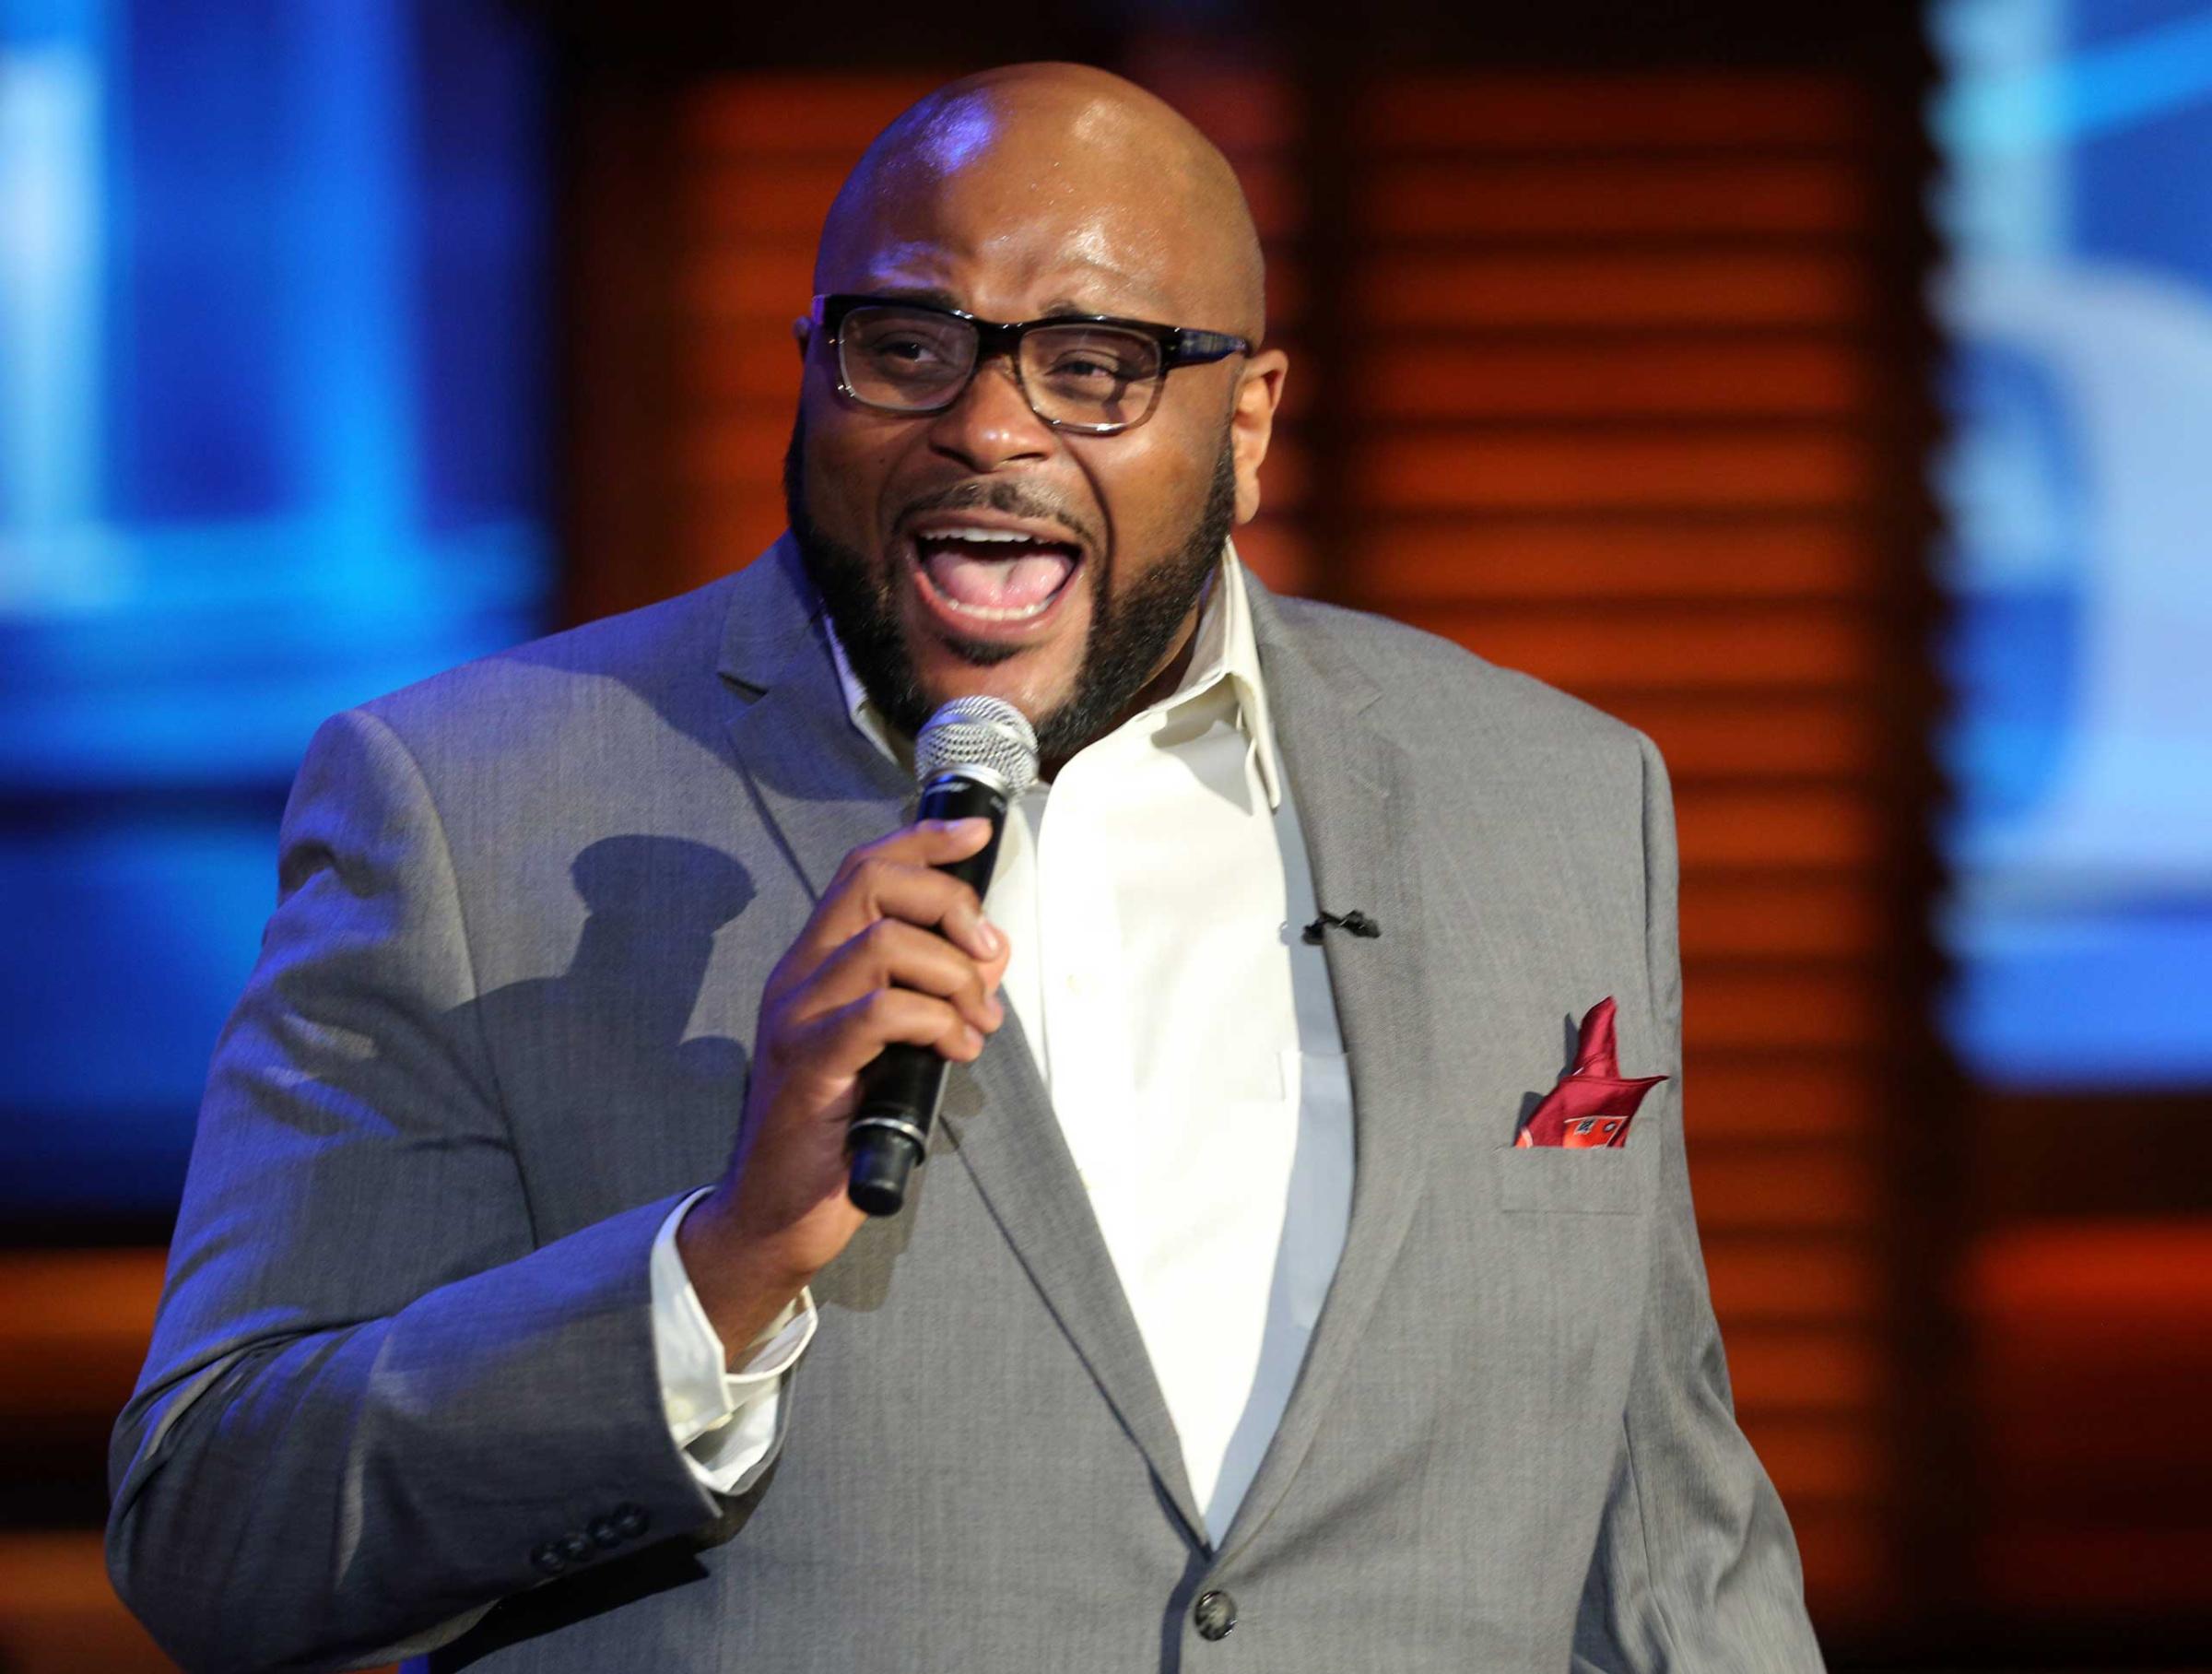 Ruben Studdard performs at When Georgia Smiled: The Robin McGraw Revelation Foundation And Verizon Unite For Second Annual Domestic Violence Summit at Paramount Studios in Hollywood, Calif. on Oct. 3, 2014.